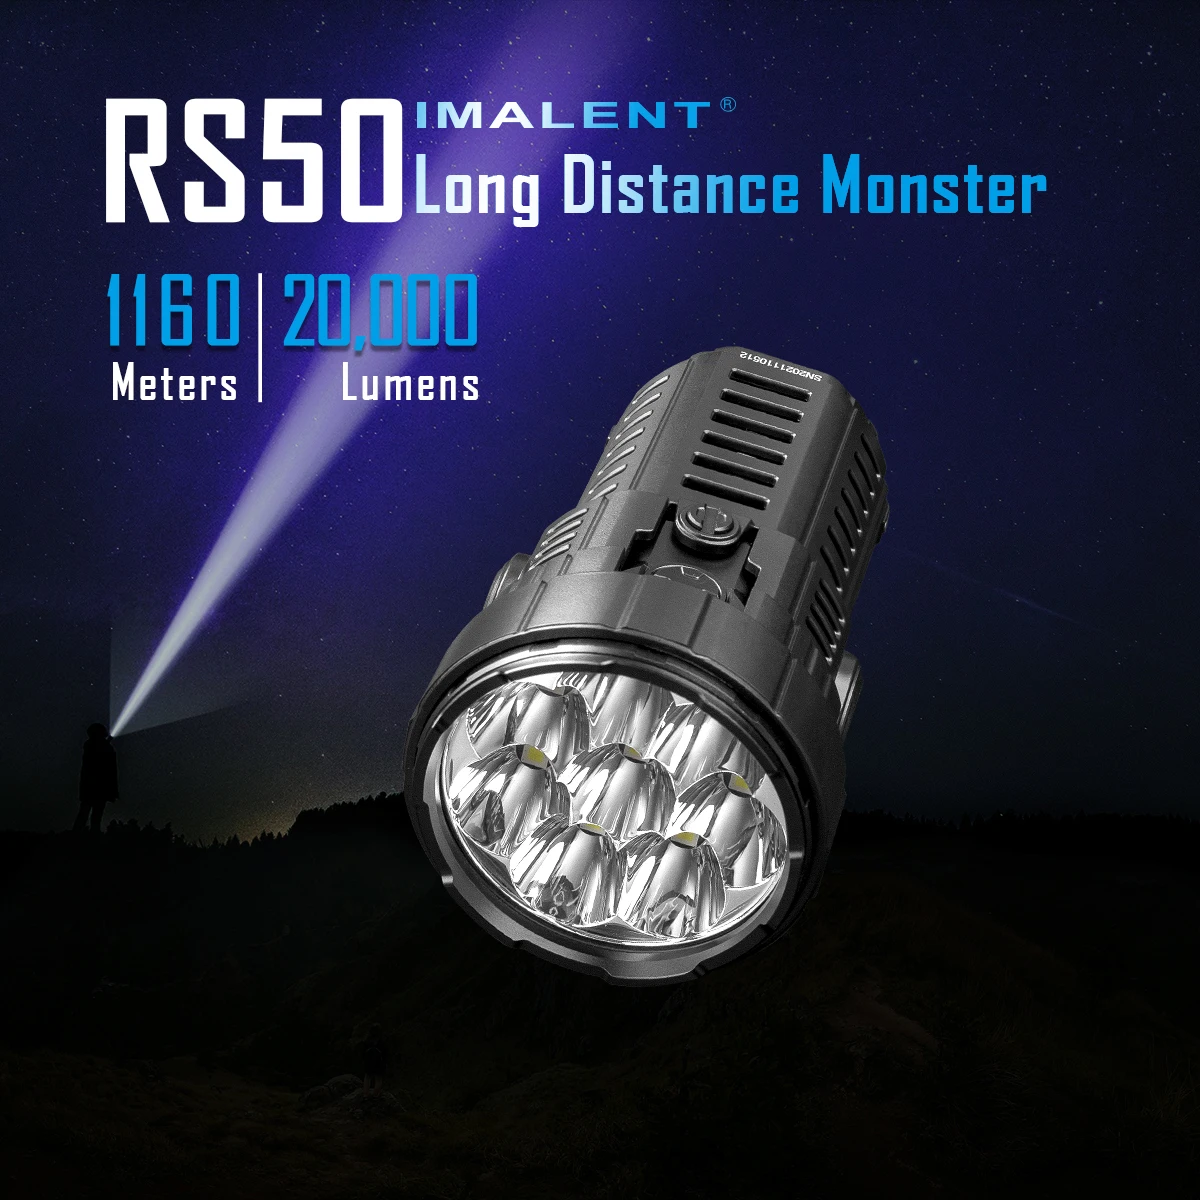 IMALENT RS50 High Bright Powerful Flashlight Professional Rechargeable Lantern Outdoor EDC Lighting Torch Power LED Flashlights